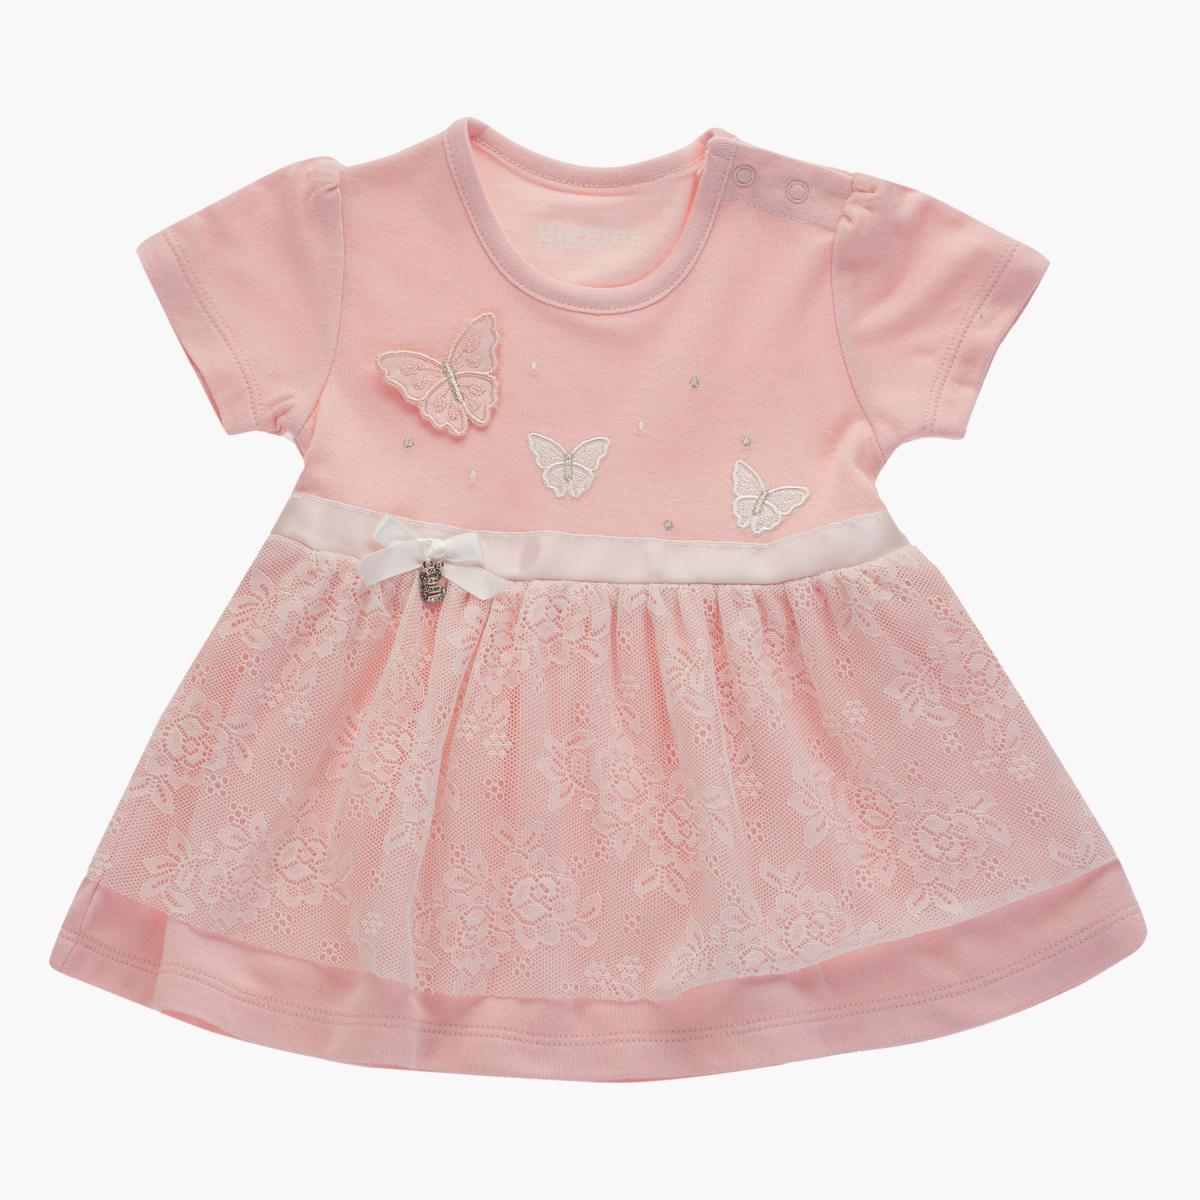 Babyshop Giggles Lace Detail Dress with Round Neck